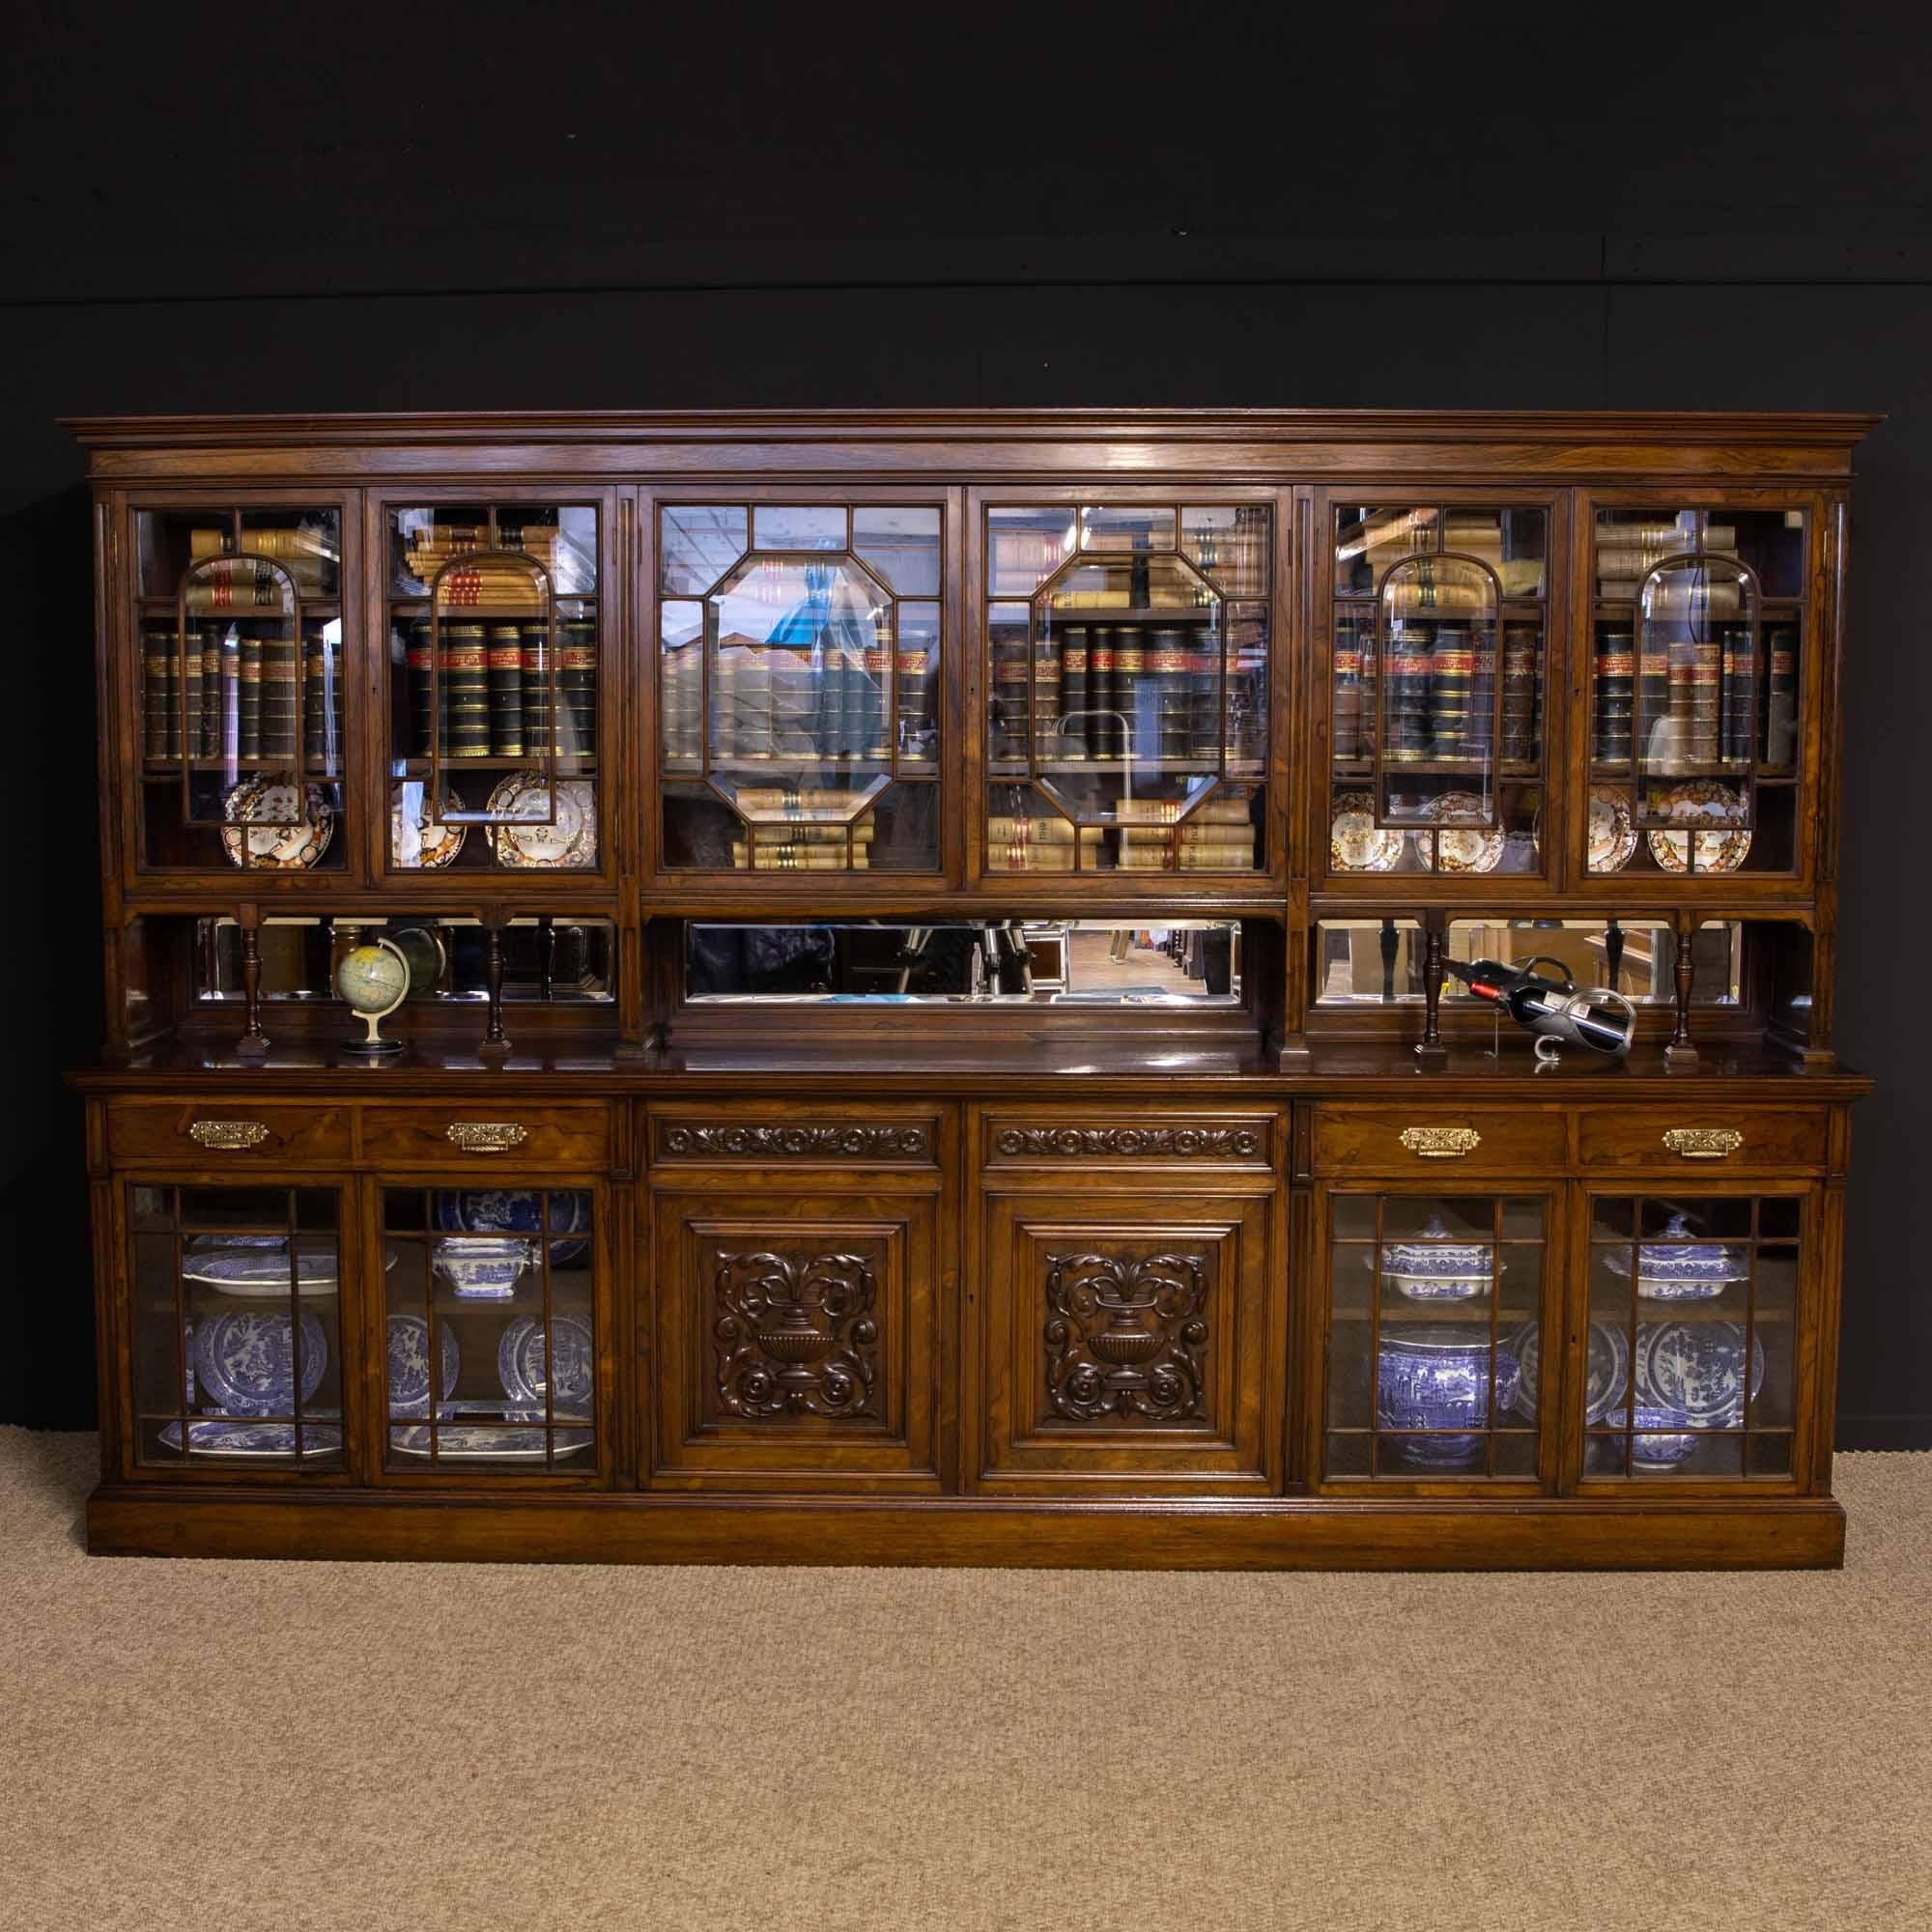 This is a magnificent Edwardian bookcase made from solid and veneered rosewood. Of large proportions at over 10 1/2 foot long but not particularly tall for it's length at 6'9 foot. The quality of the piece is outstanding with every effort gone into